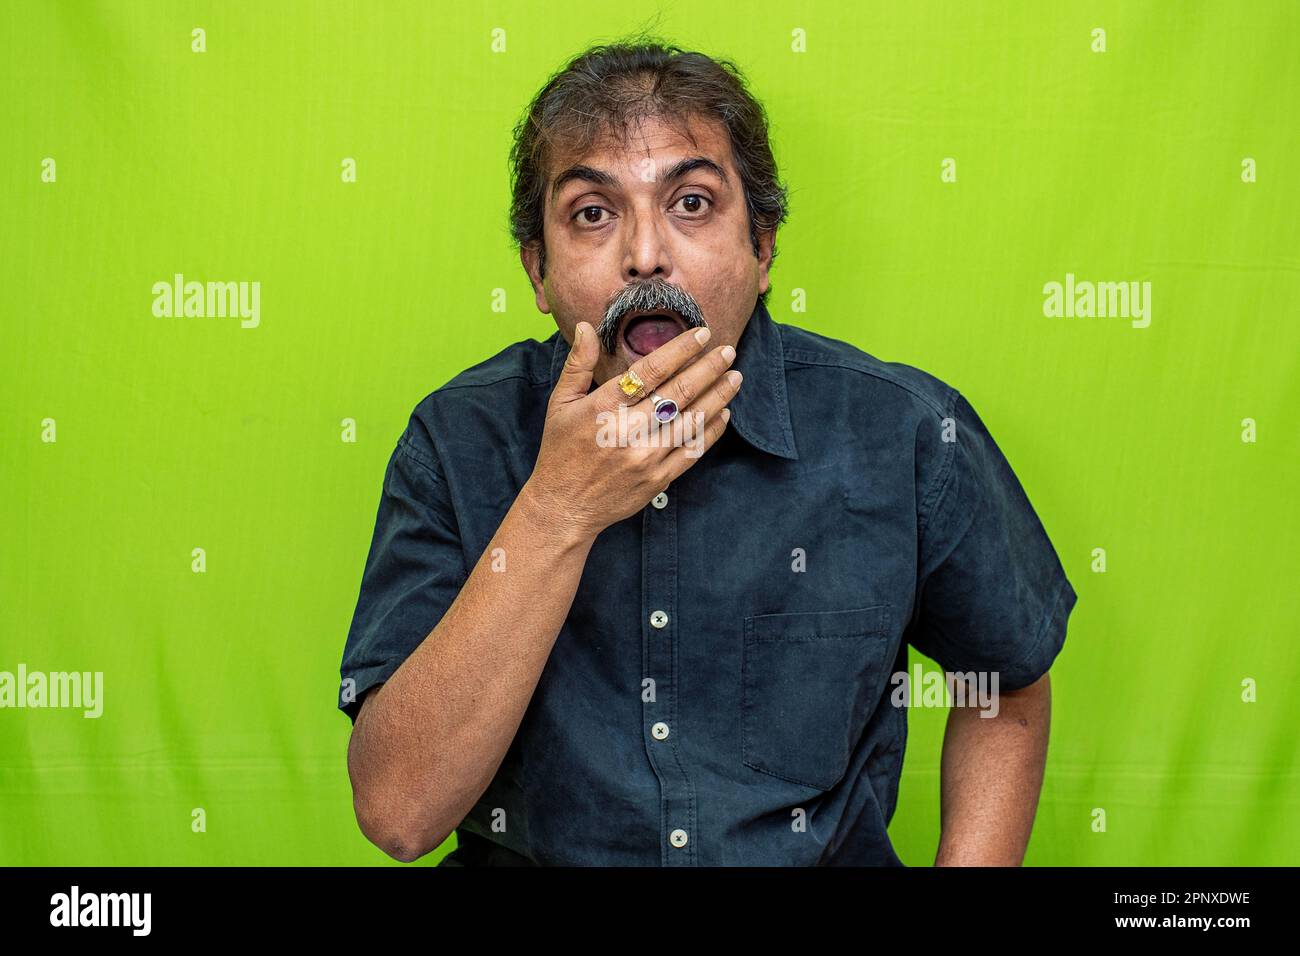 A well-dressed corporate man in a black shirt is seen standing against a green screen, with his right hand on his mouth in a surprised expression Stock Photo